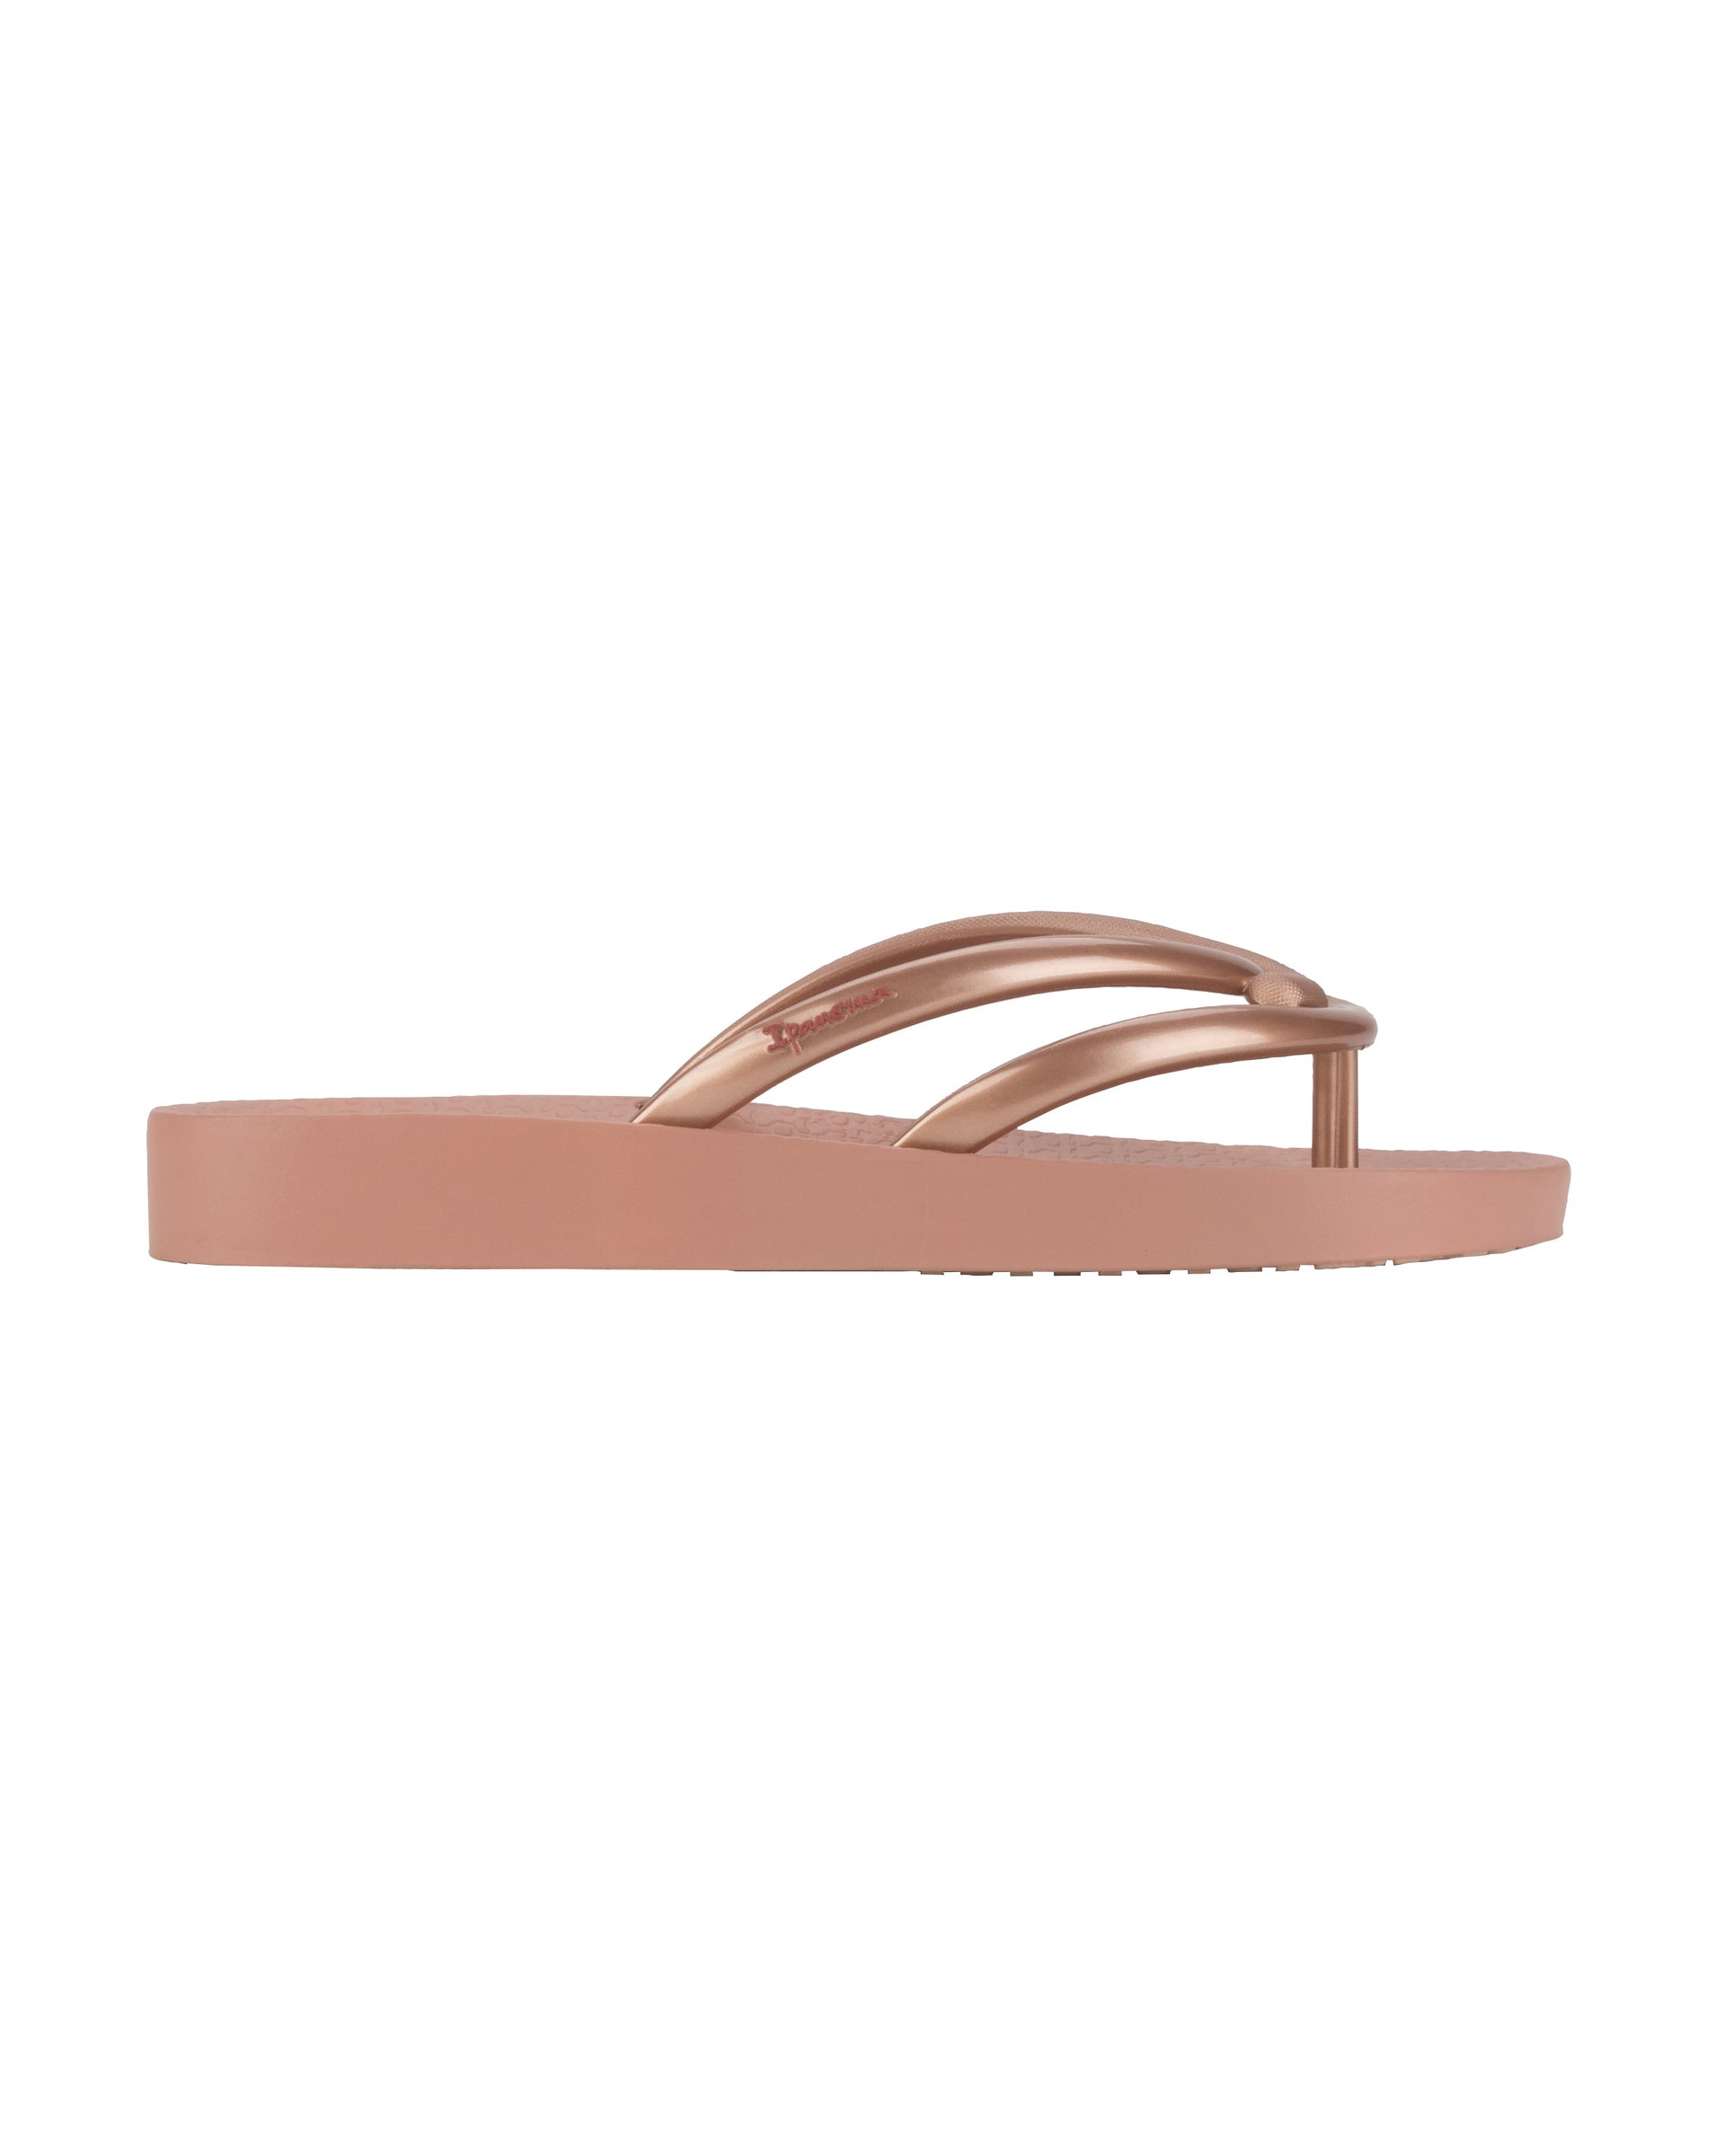 Outer side view of a pink Ipanema Comfy women's flip flop.